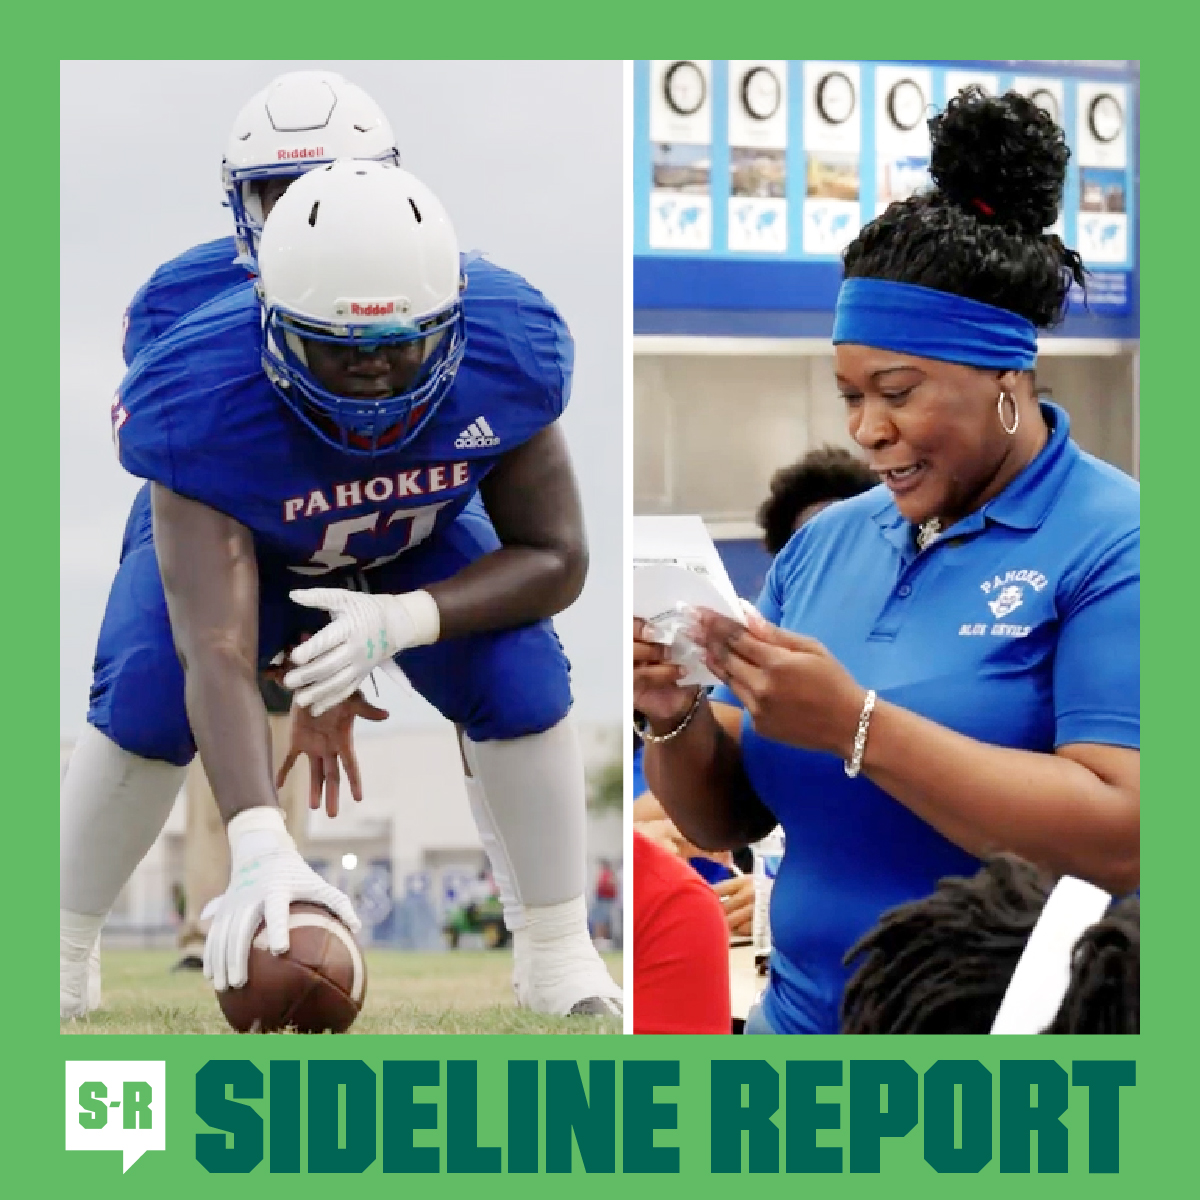 Pahokee High School football gives its players a strong sense of family as they strive for academic and athletic success. At DICK’S, we’re proud to support them with a $75,000 grant as part of our 75for75 Sports Matter Grant Program. Learn more!